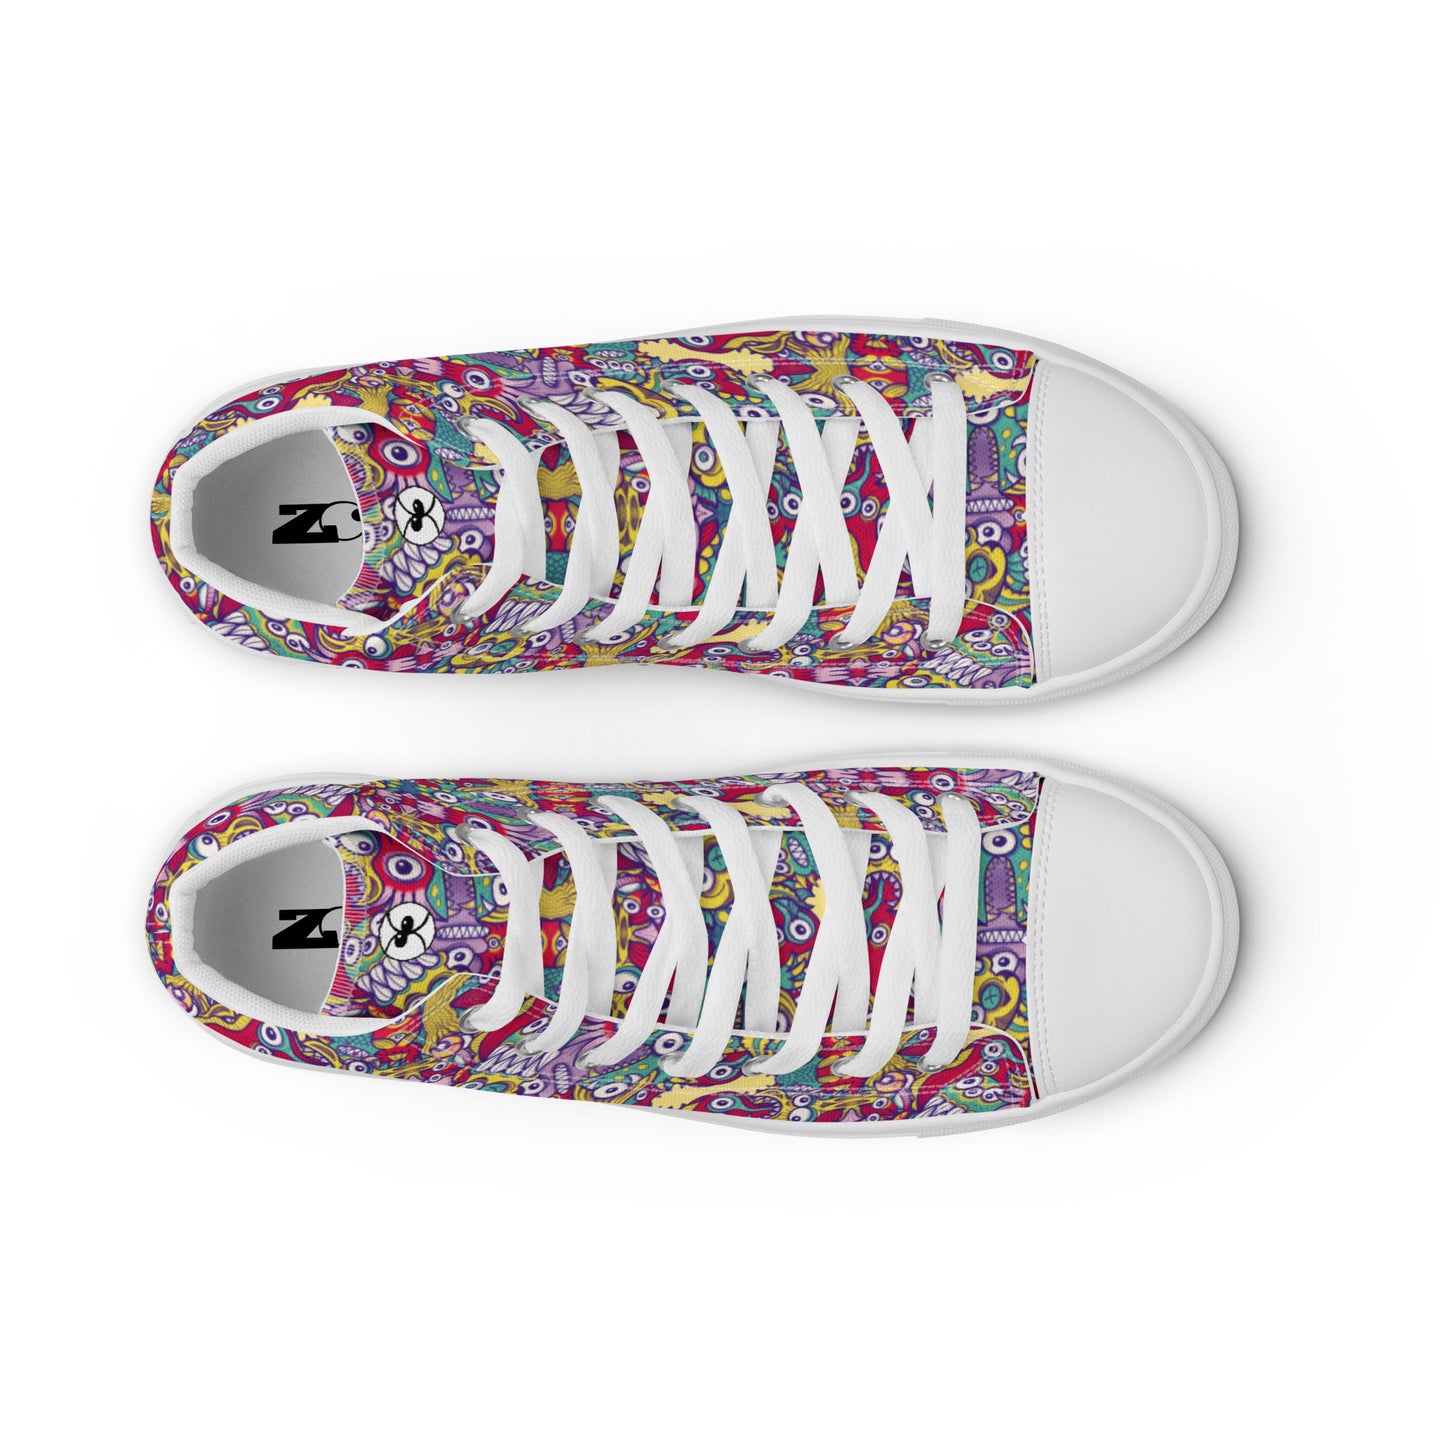 Exquisite corpse of doodles in a pattern design Men’s high top canvas shoes. Top view